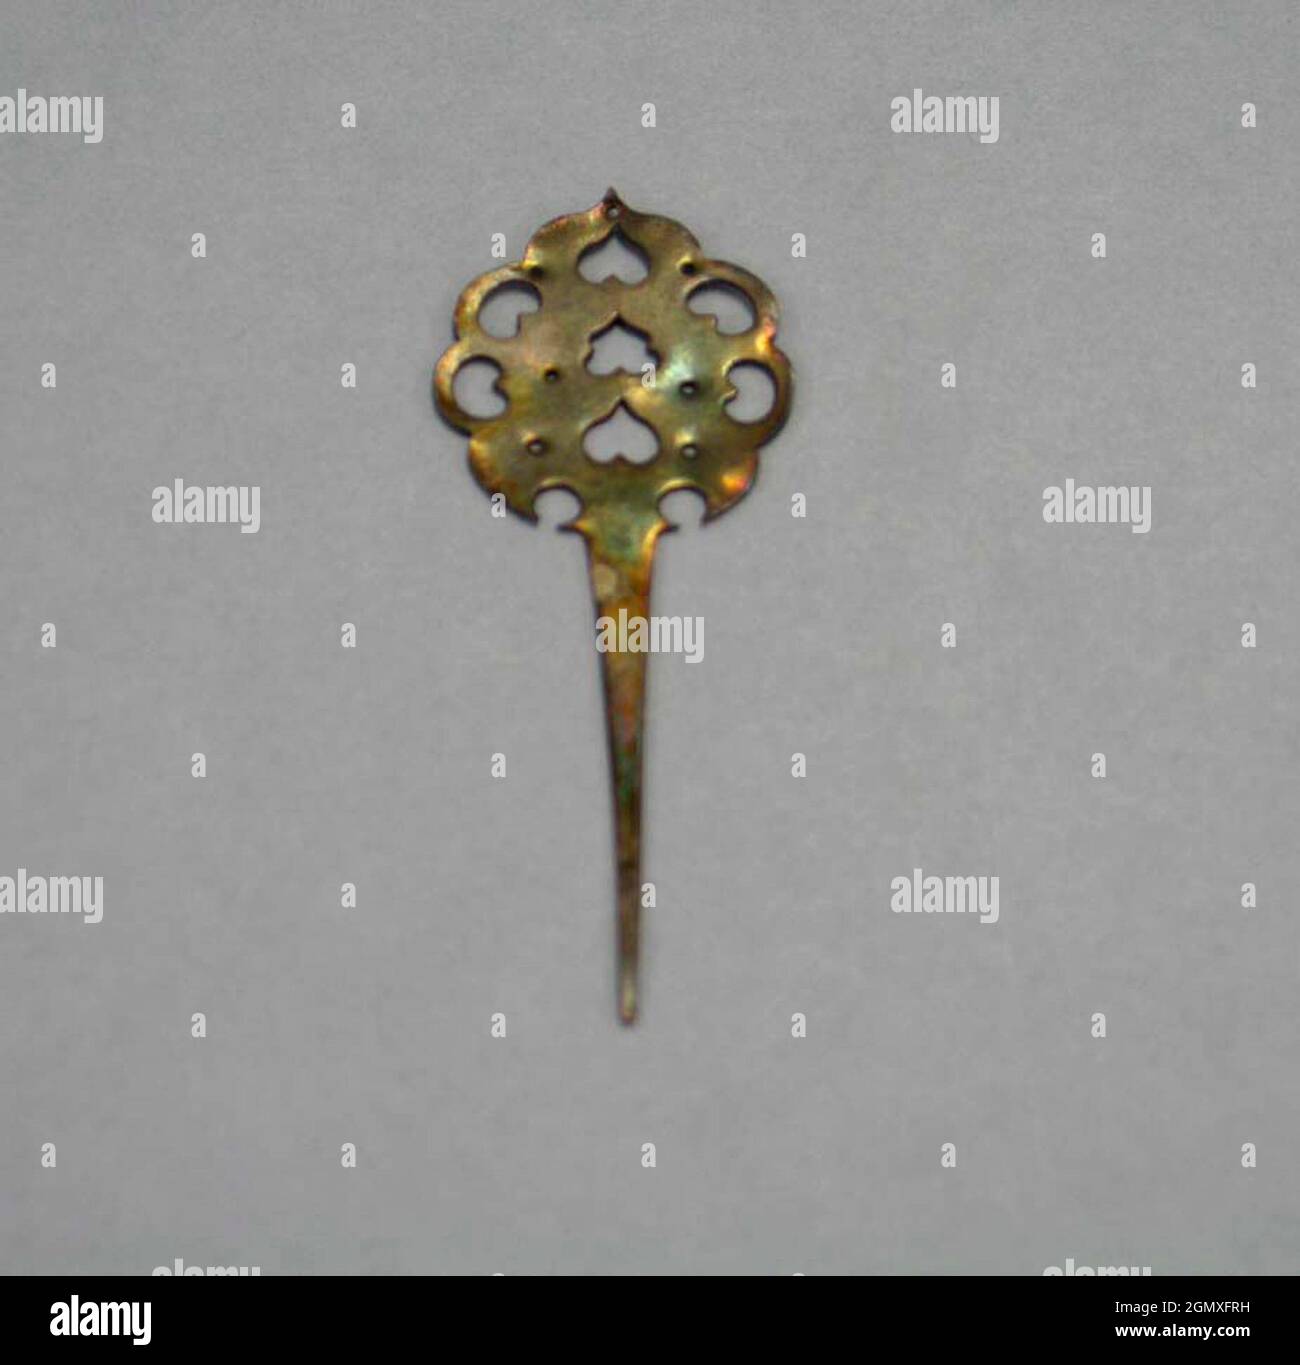 Hairpin. Period: Tang dynasty (618-907); Culture: China; Medium: Silver inlay; Classification: Metalwork Stock Photo